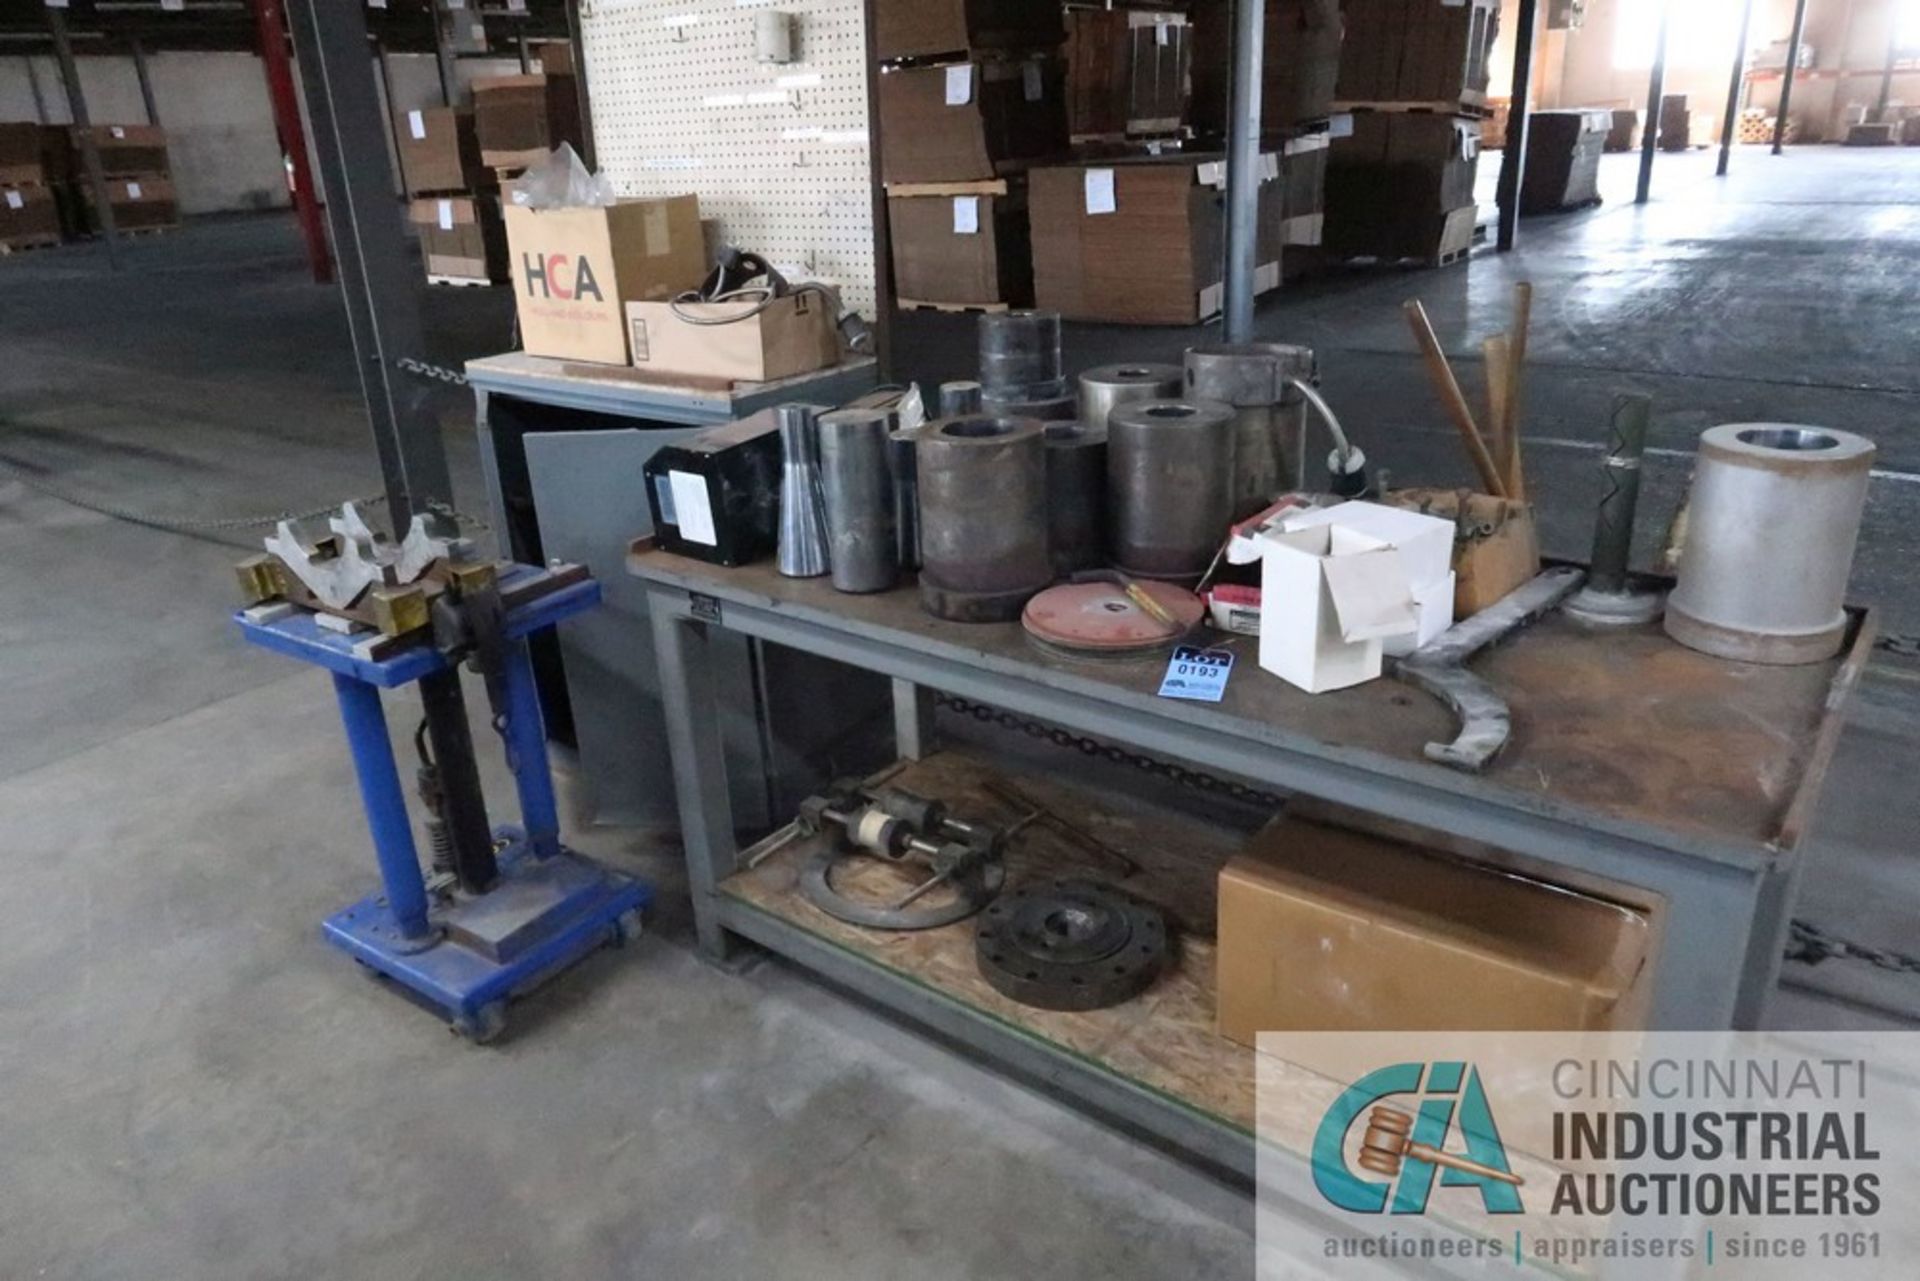 (LOT) EXTRUDER PARTS, MPI COUNTER, BRUTE MACHINE BASE, HD BENCH, DIE LIFT CART, 2-DOOR CABINET